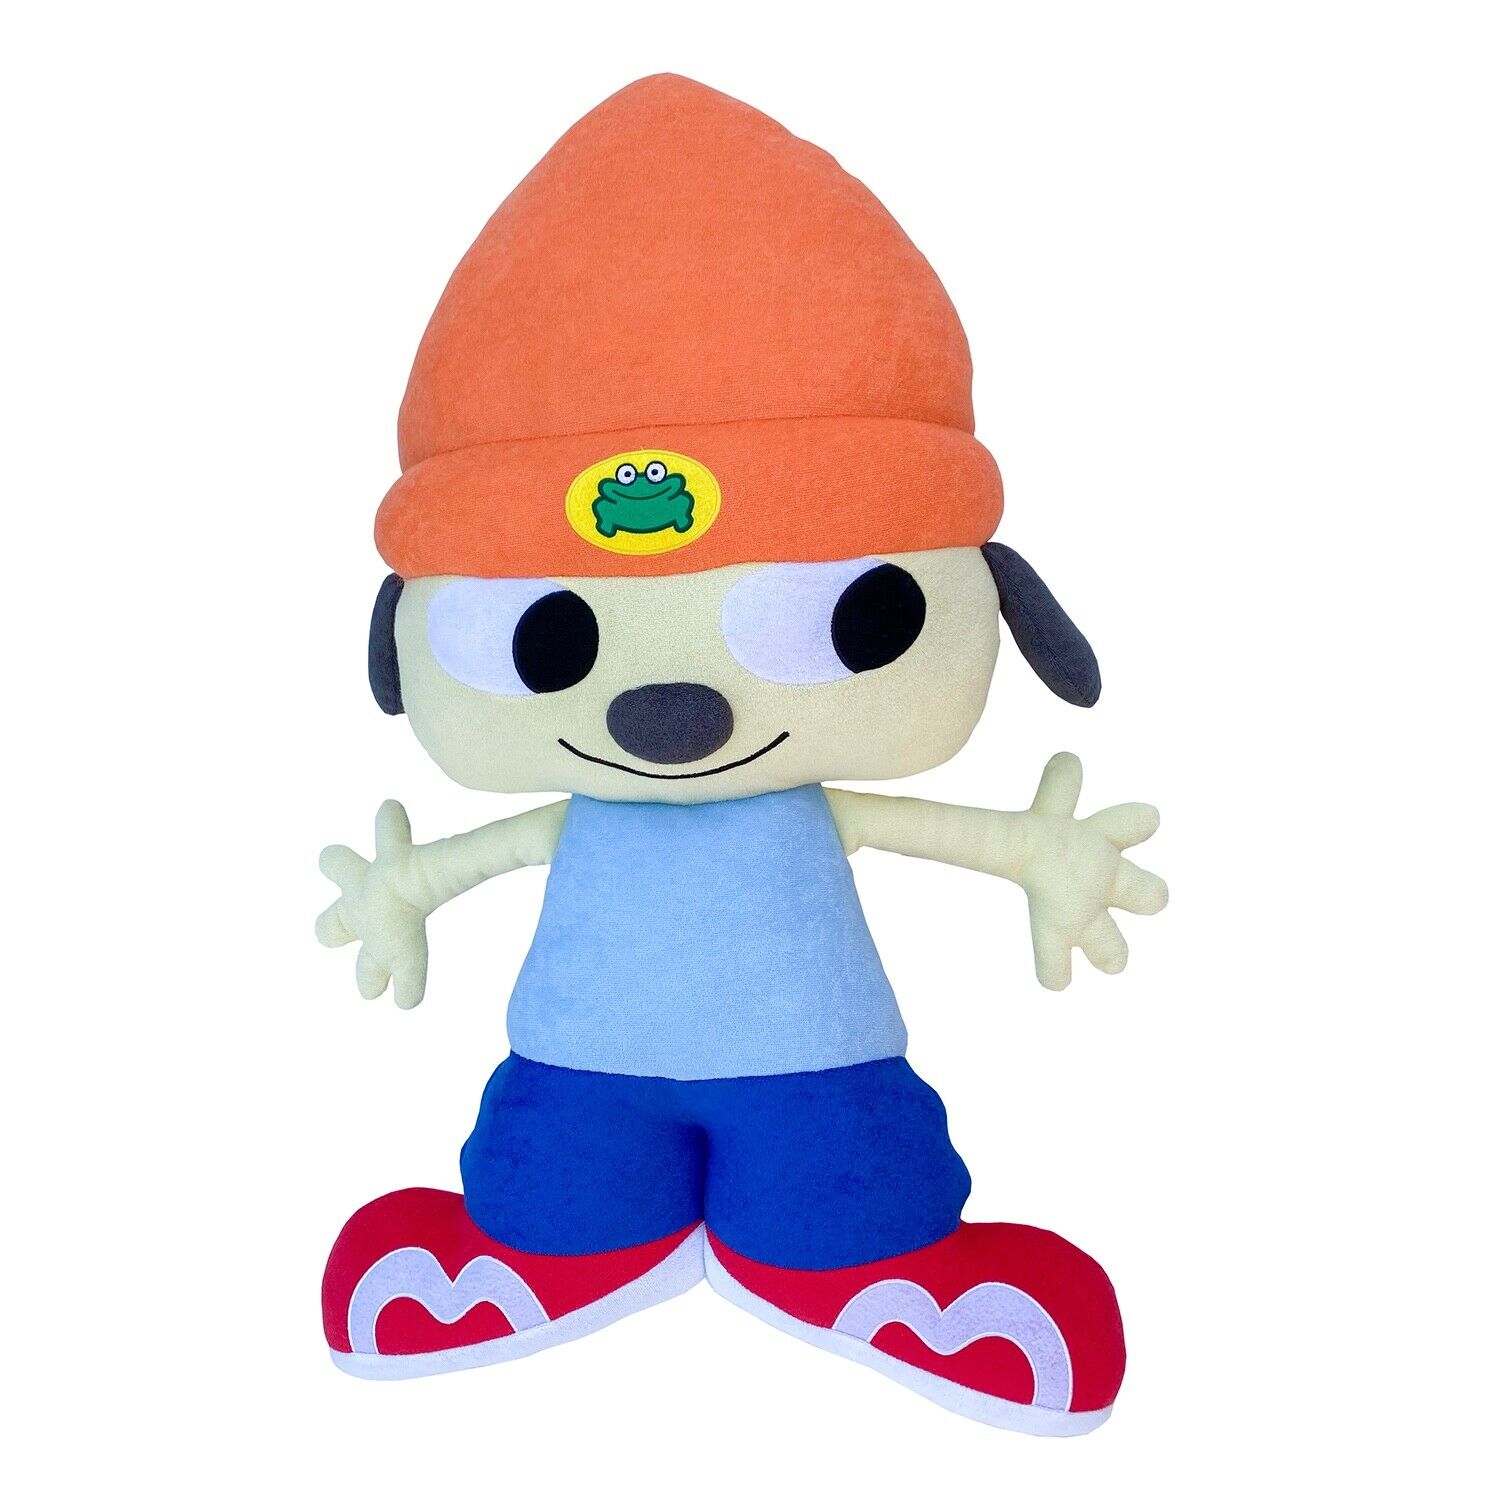 parappa the rapper Parappa Big Plush WIND AND SEA JAPAN NEW Limited